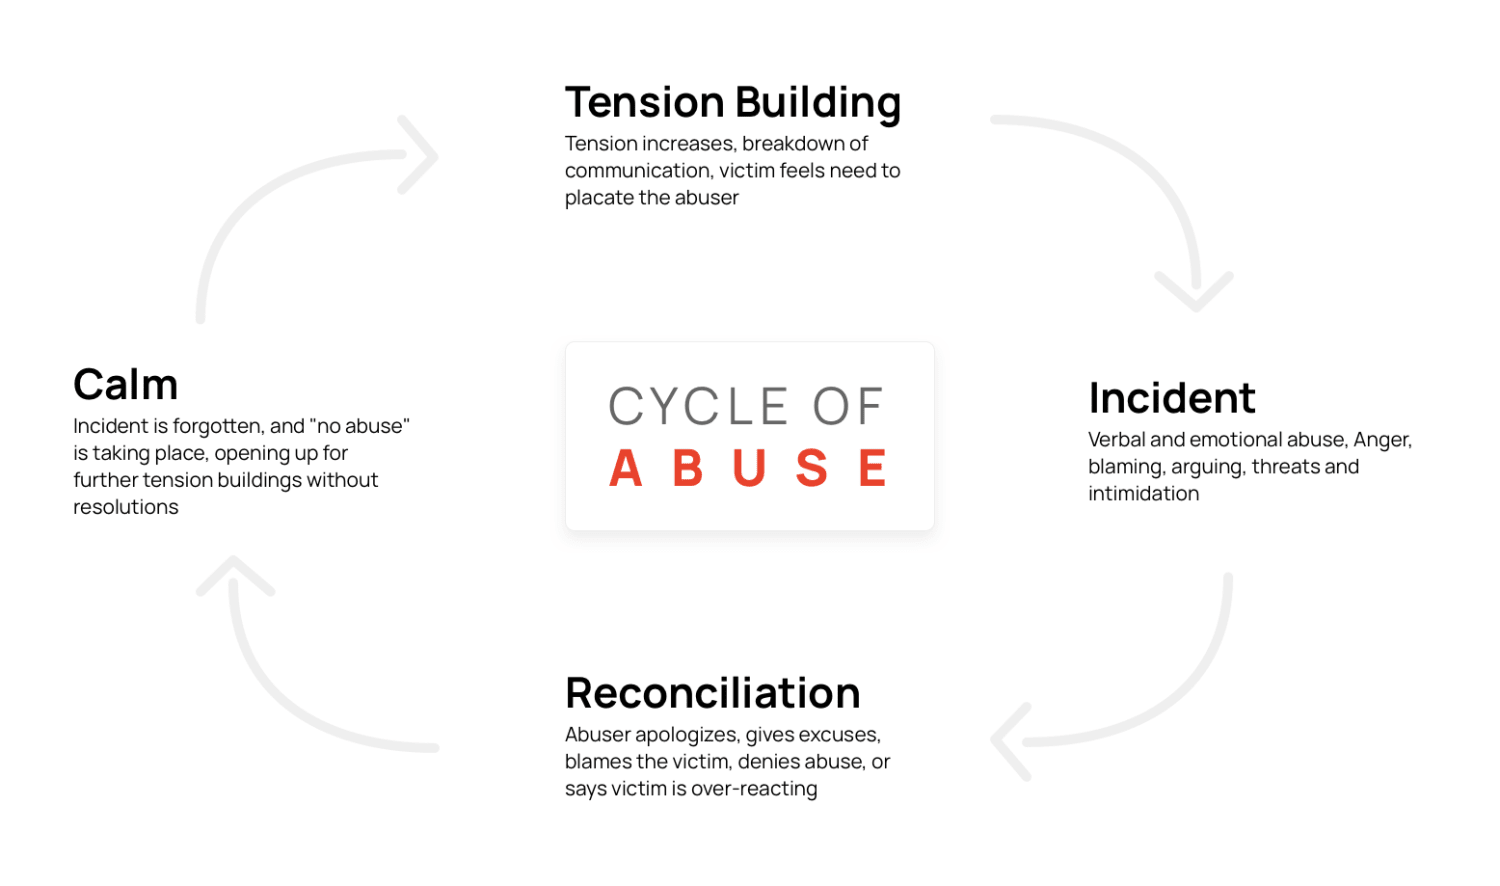 Identifying the cycle of abuse